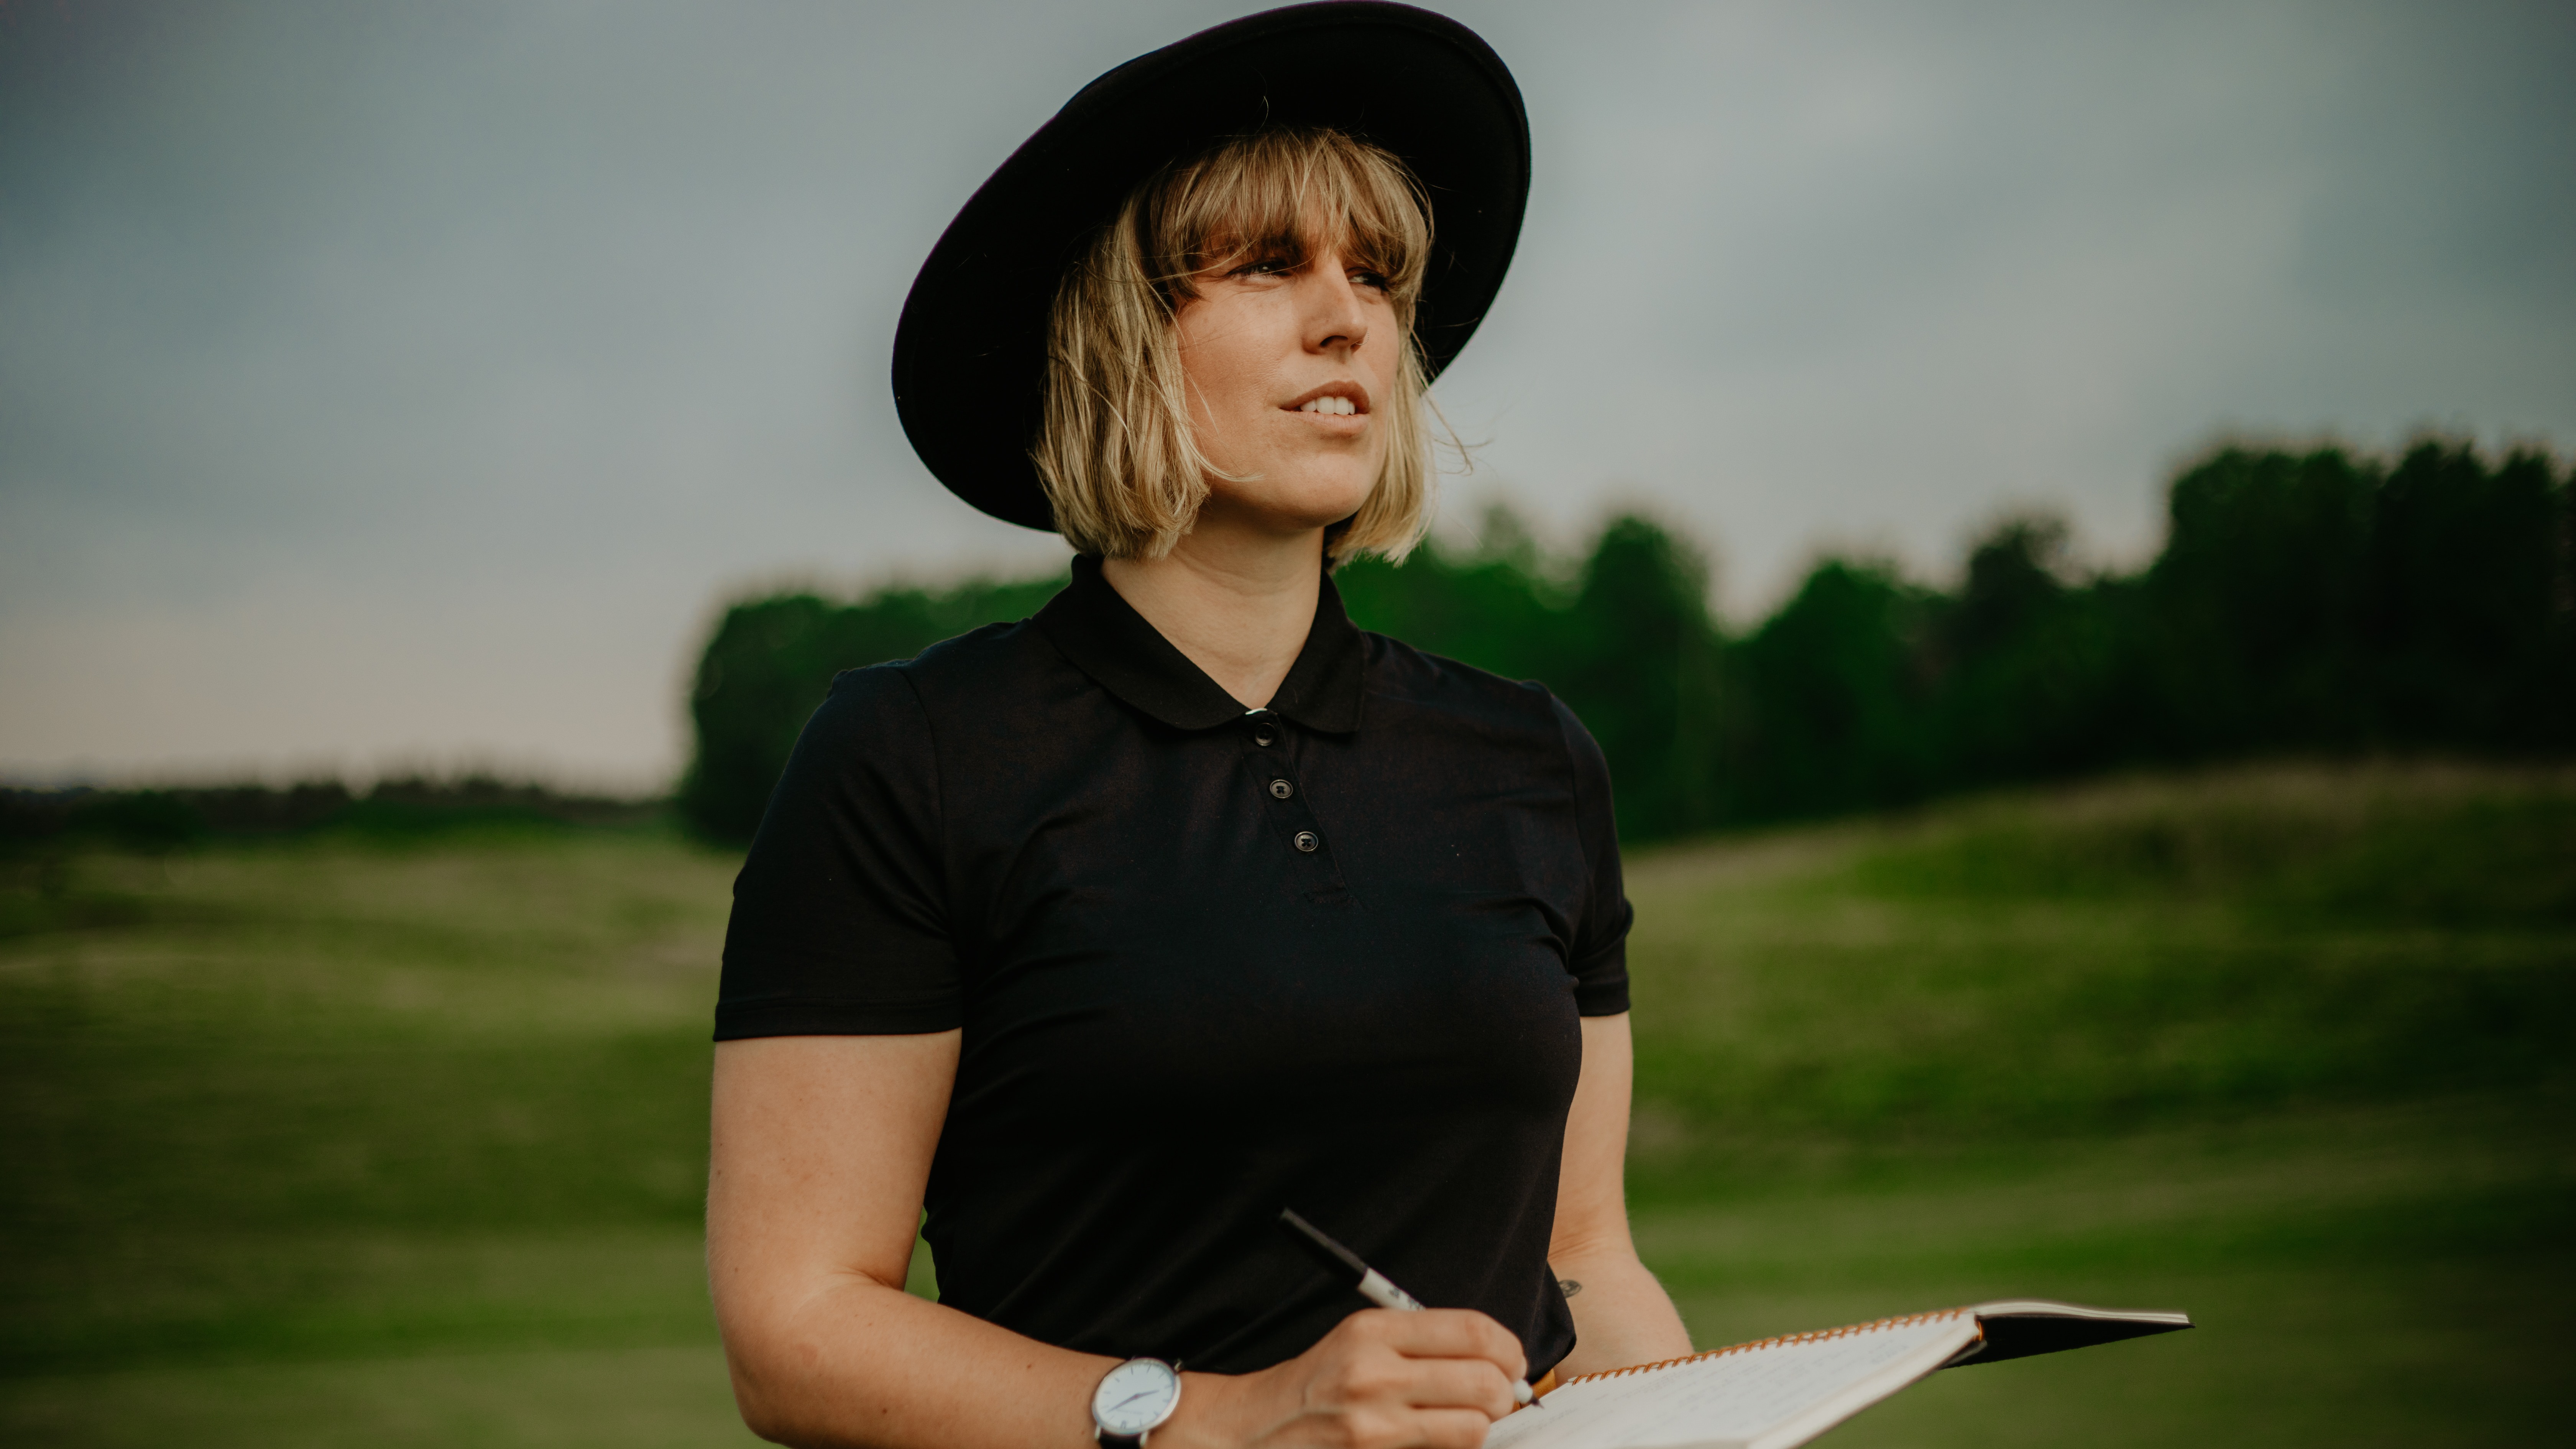 Christine Fraser is Bringing a Breath of Fresh Air to Golf Course Design pic